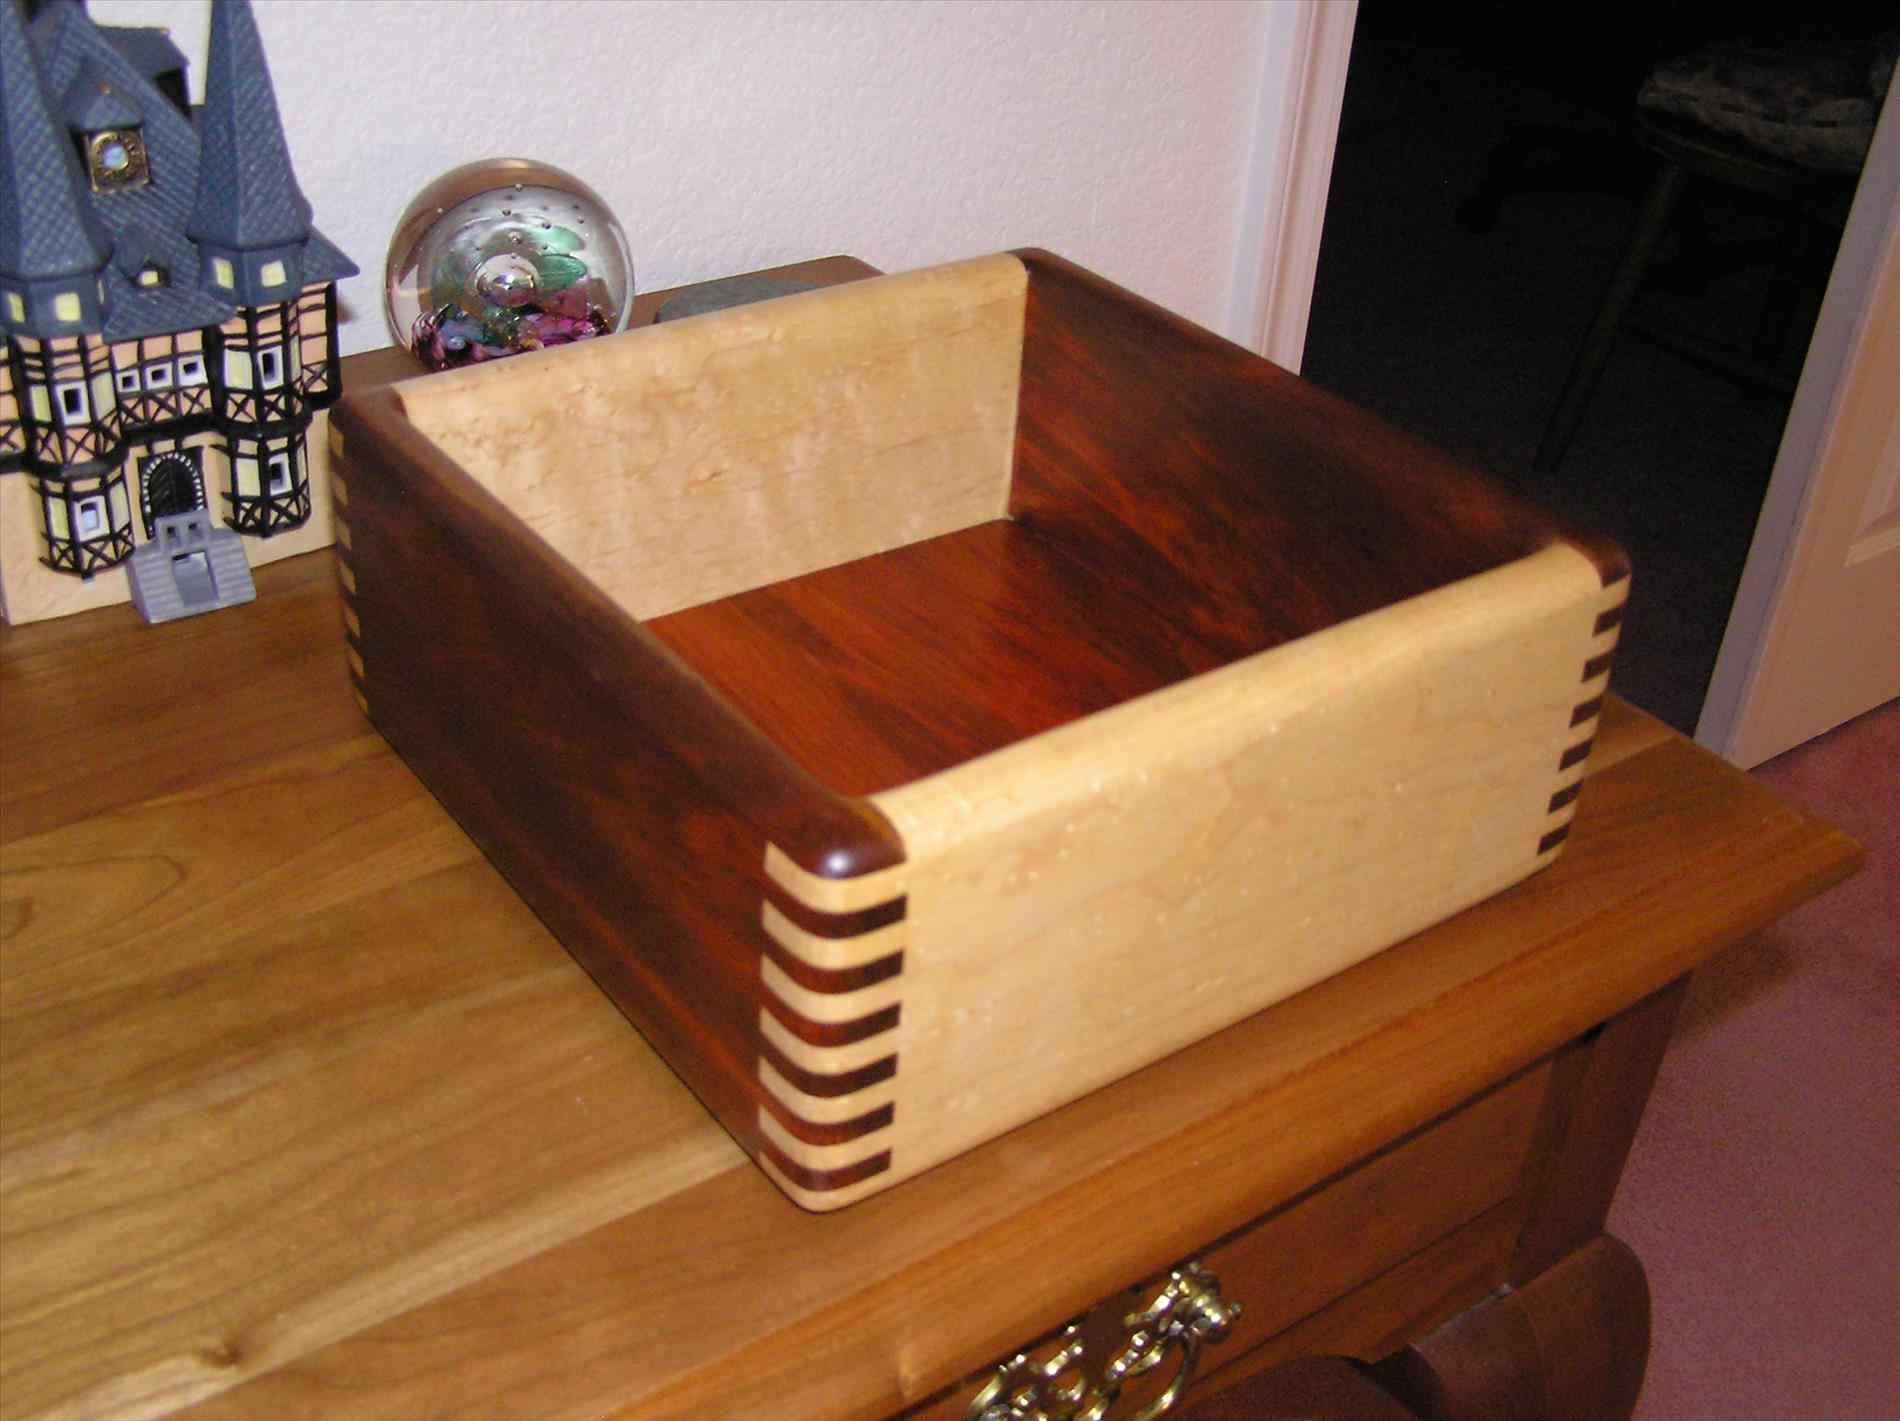 Woodworking Projects To Sell